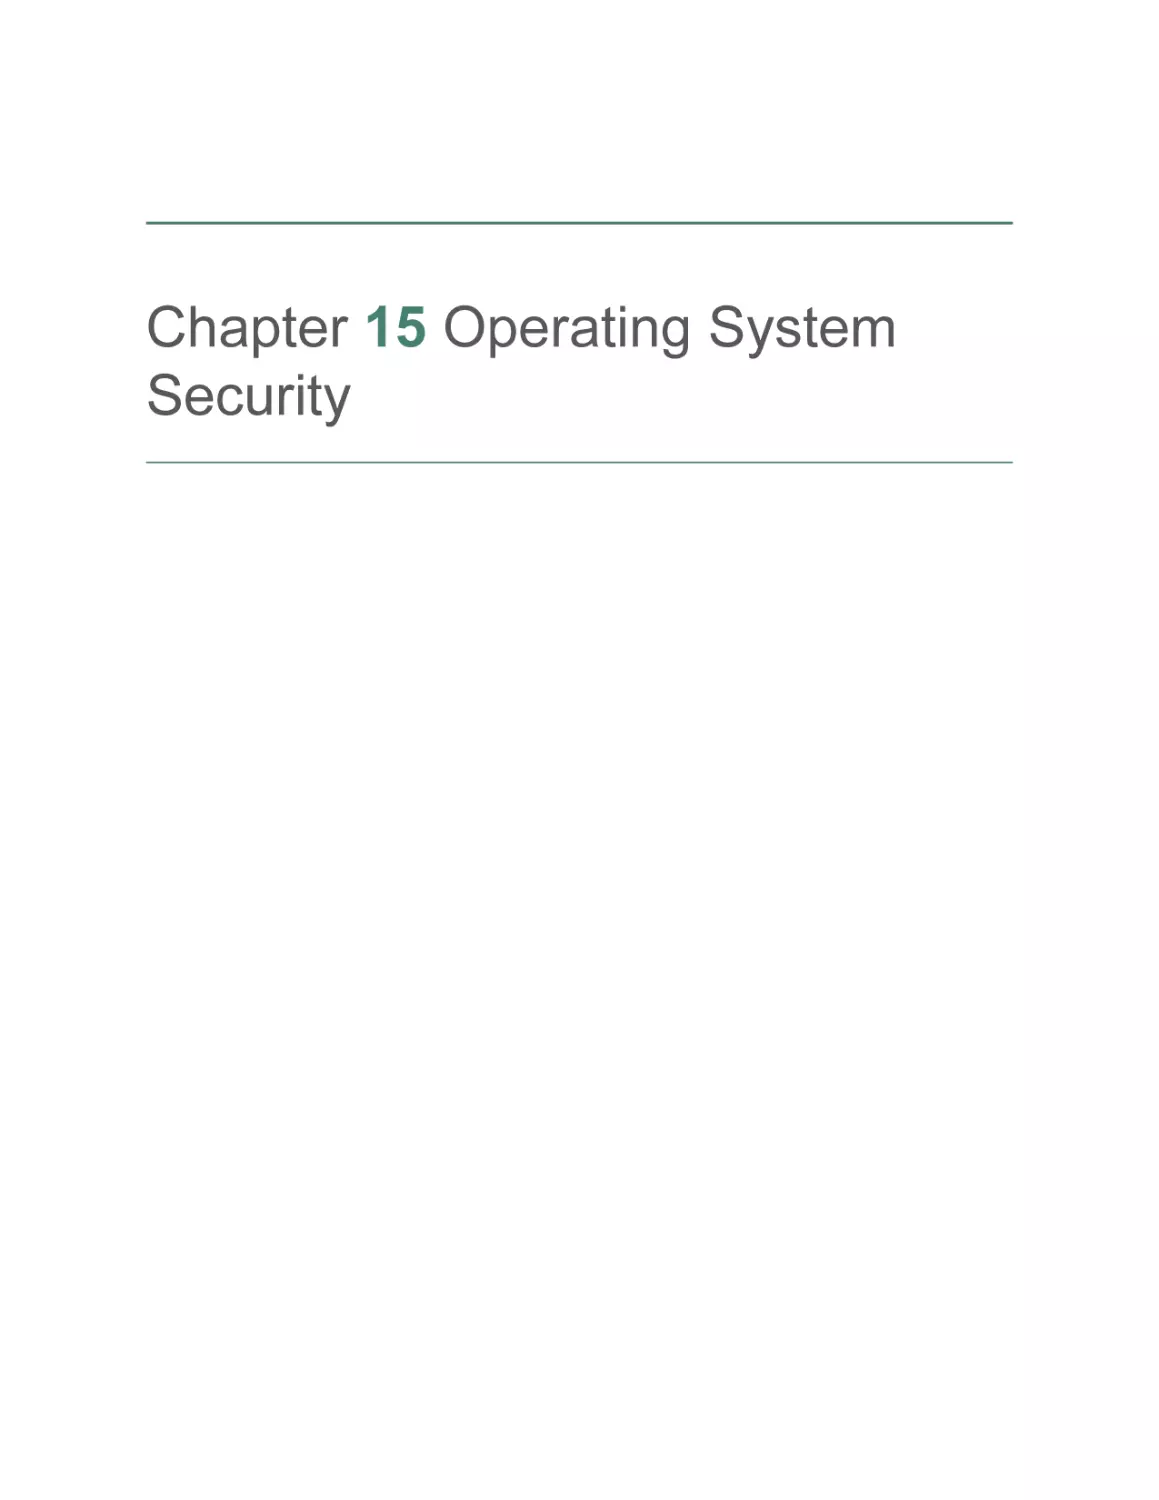 Chapter 15 Operating System Security